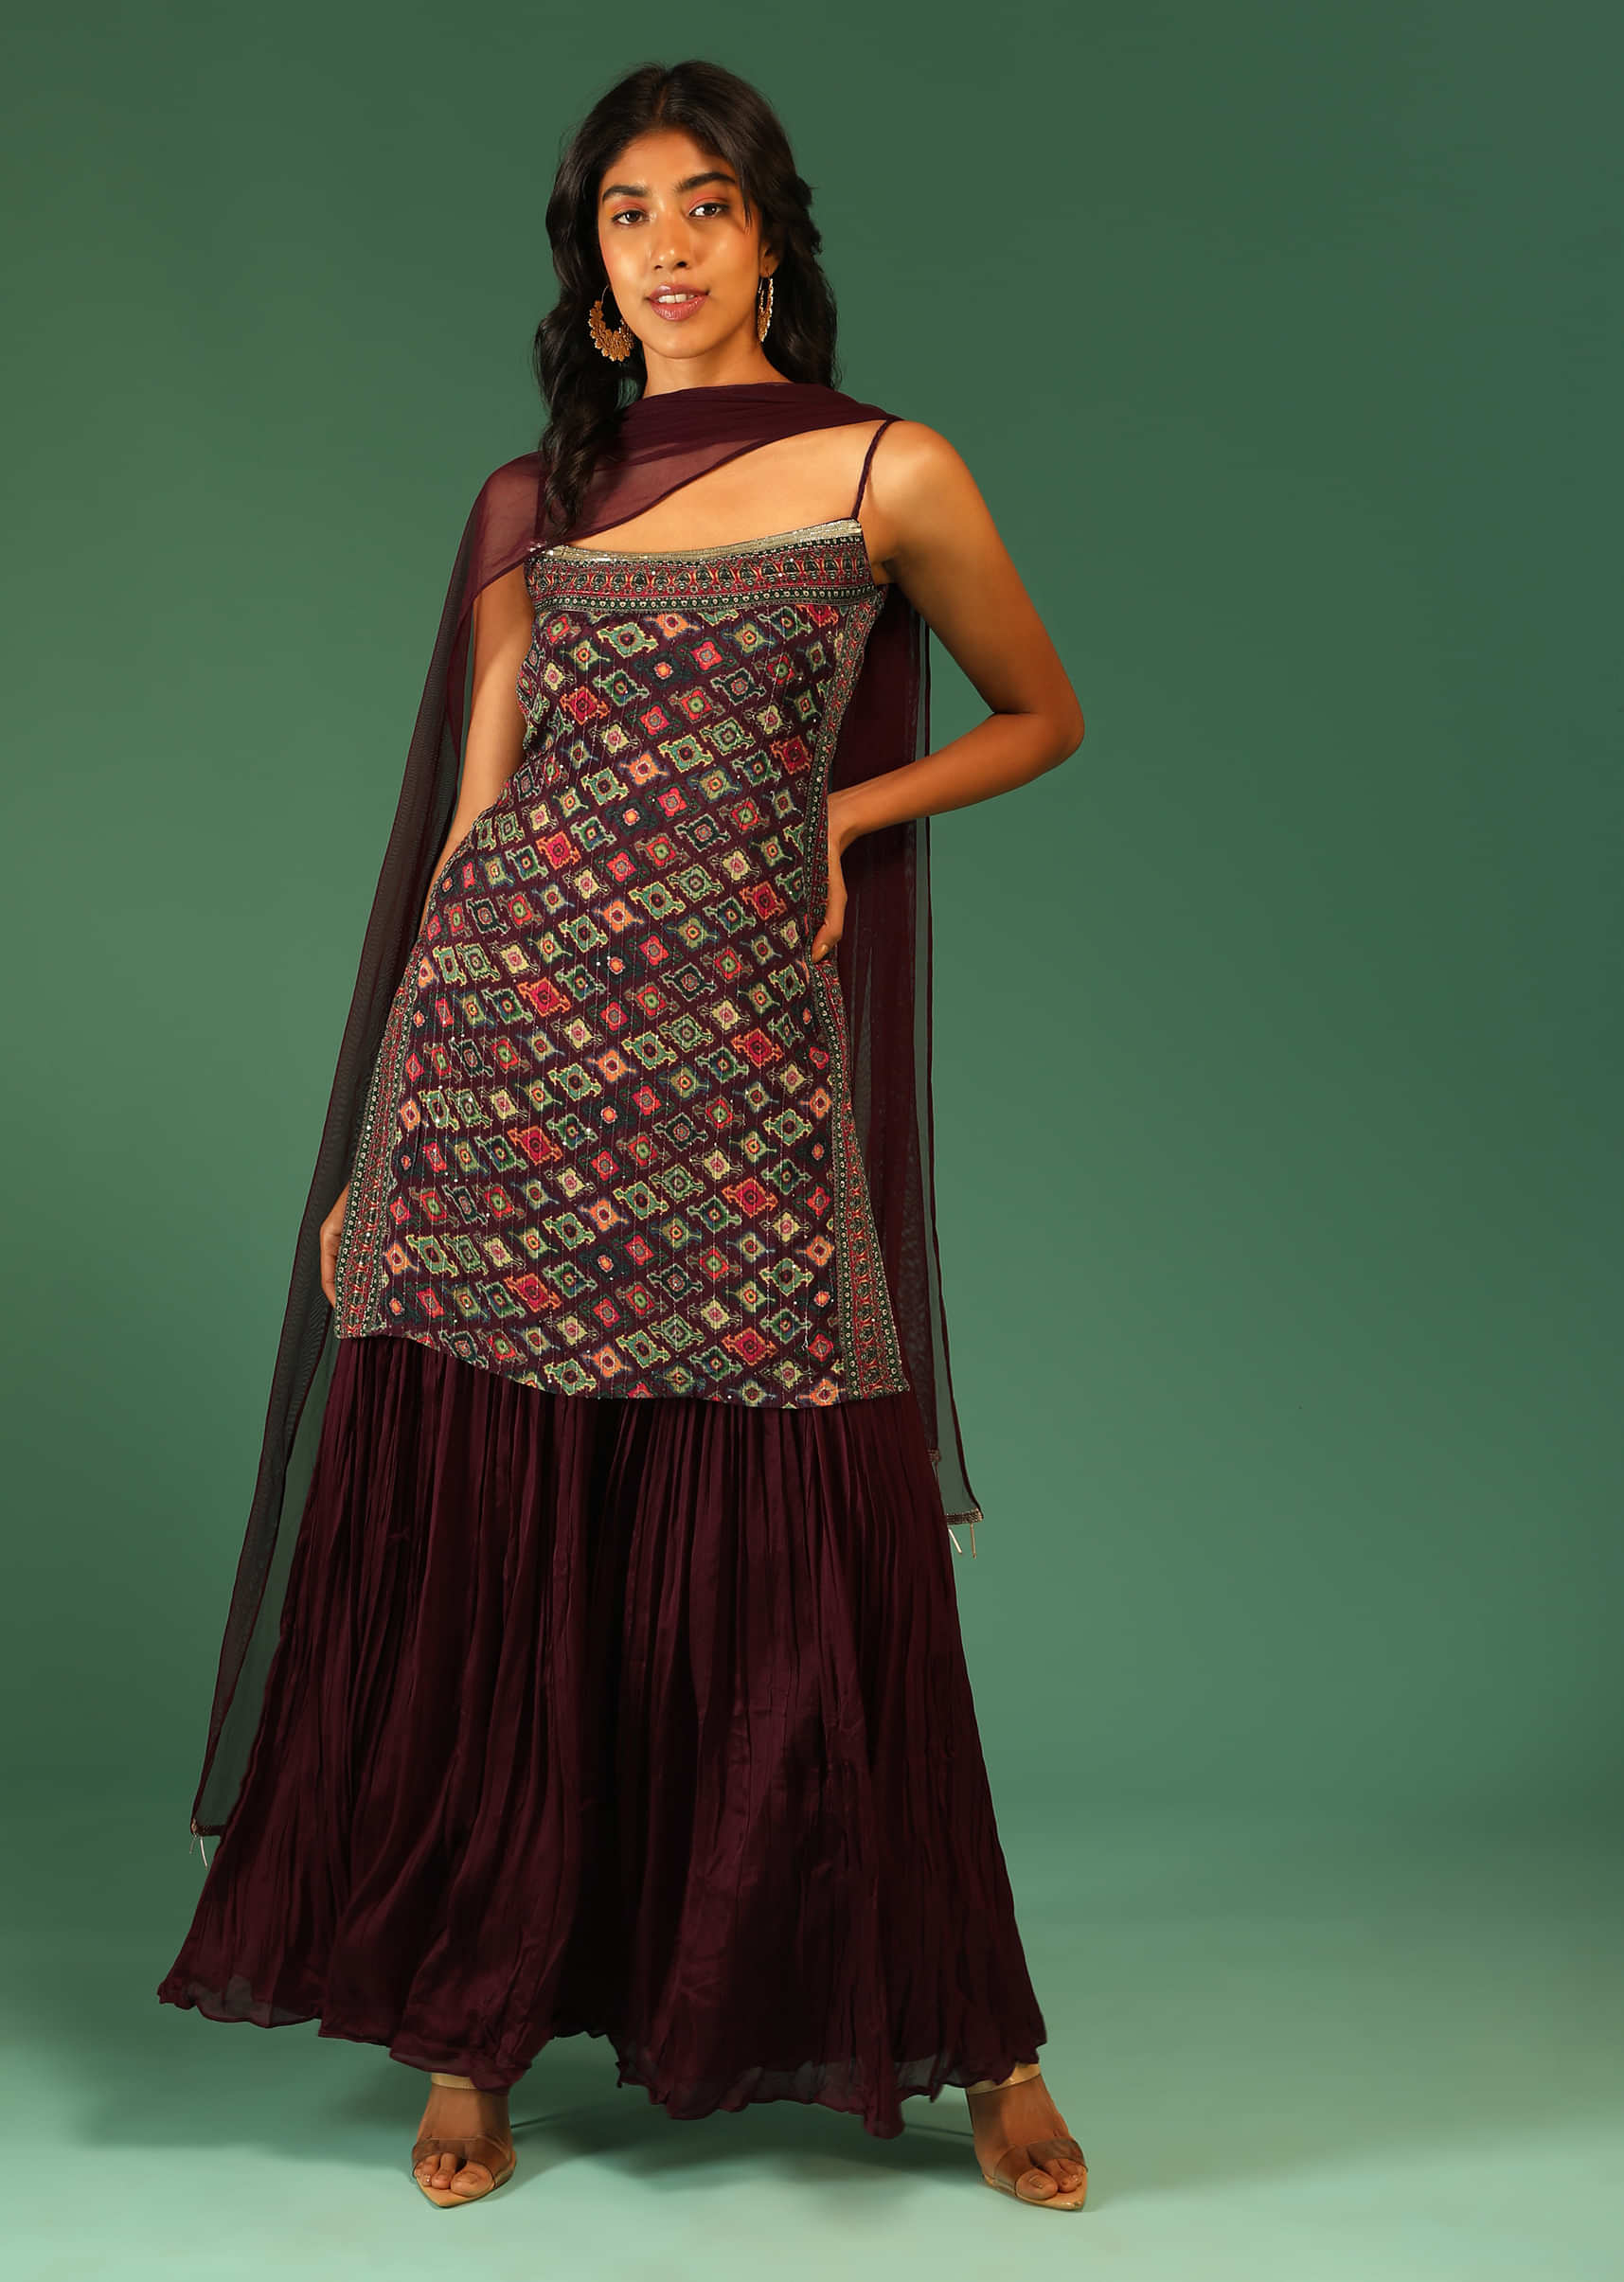 Plum Purple Sharara Suit In Chiffon With Patola Print All Over And Spaghetti Straps  